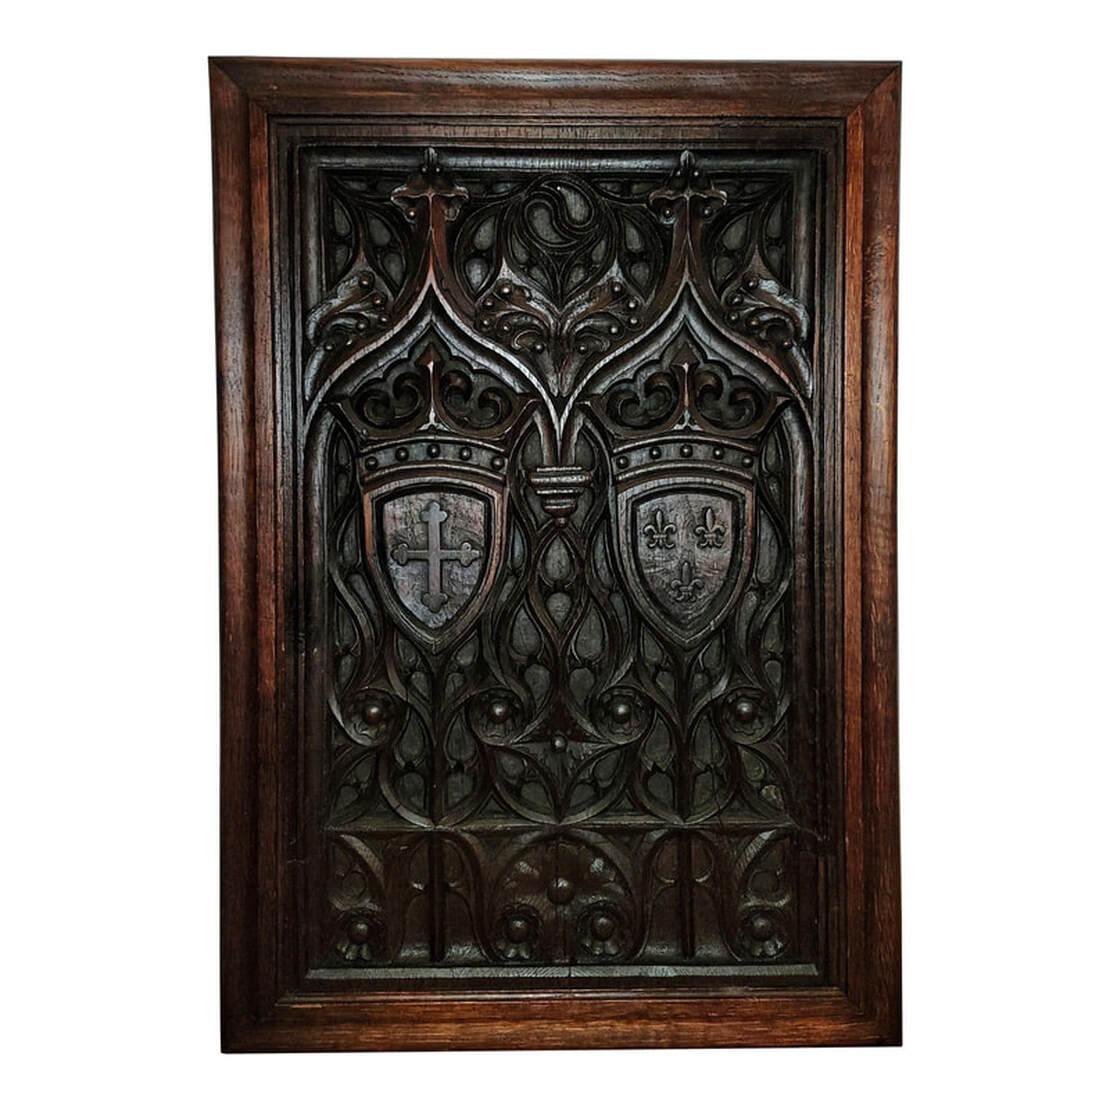 High Gothic tracery carved oak wood panel in oak frame.  Designs within the tracery include roundels, daggers, and cusps.  Two Gothic arches are carved over coats of arms. One coat of arms features a crown over a shield with a crosslet / cross bottony / cross trefly, or cross with trefoil tips. The second coat of arms features a crown over a shield with a trio of fleur-de-lis.